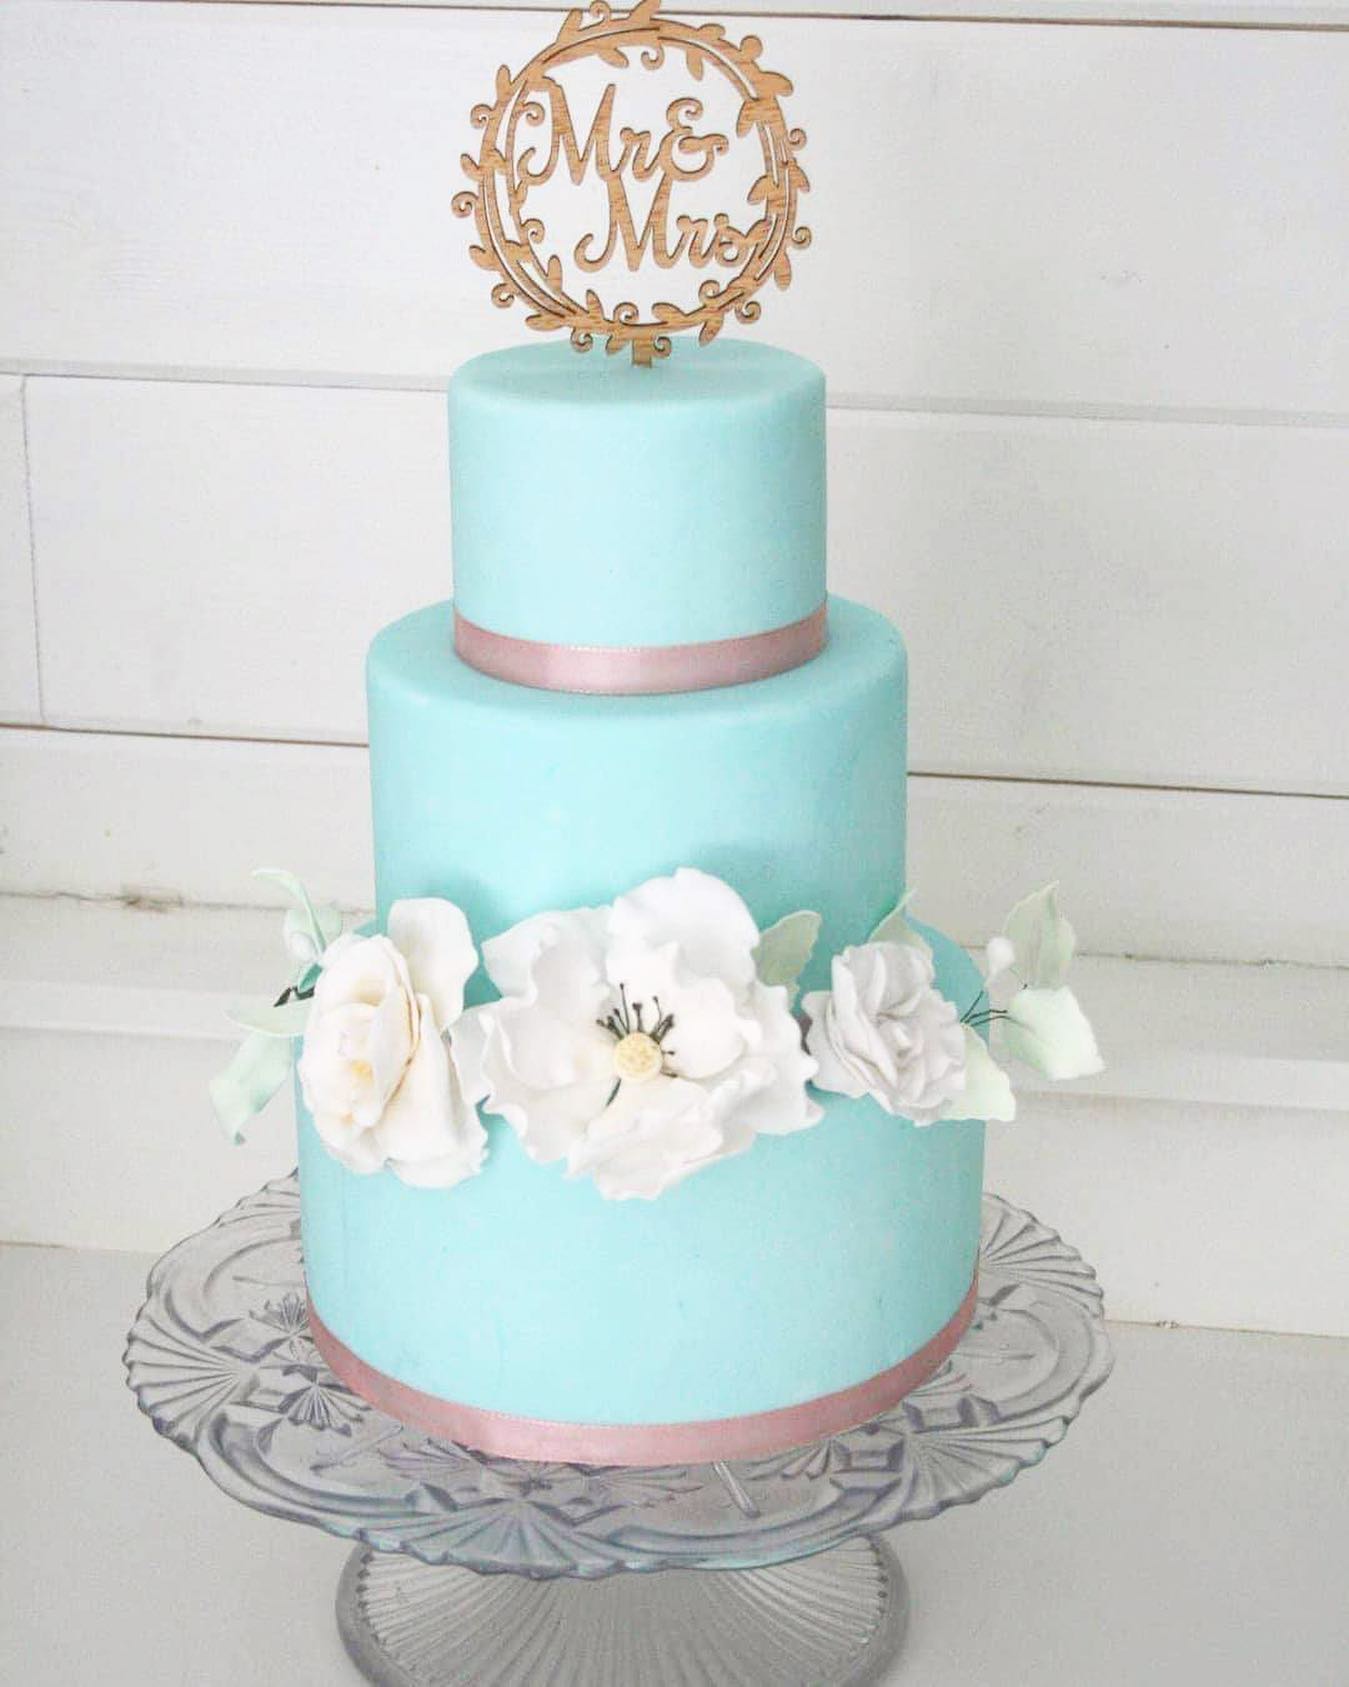 A three tiered wedding cake. This is a blue wedding cake with pink ribbons and white flowers on it.